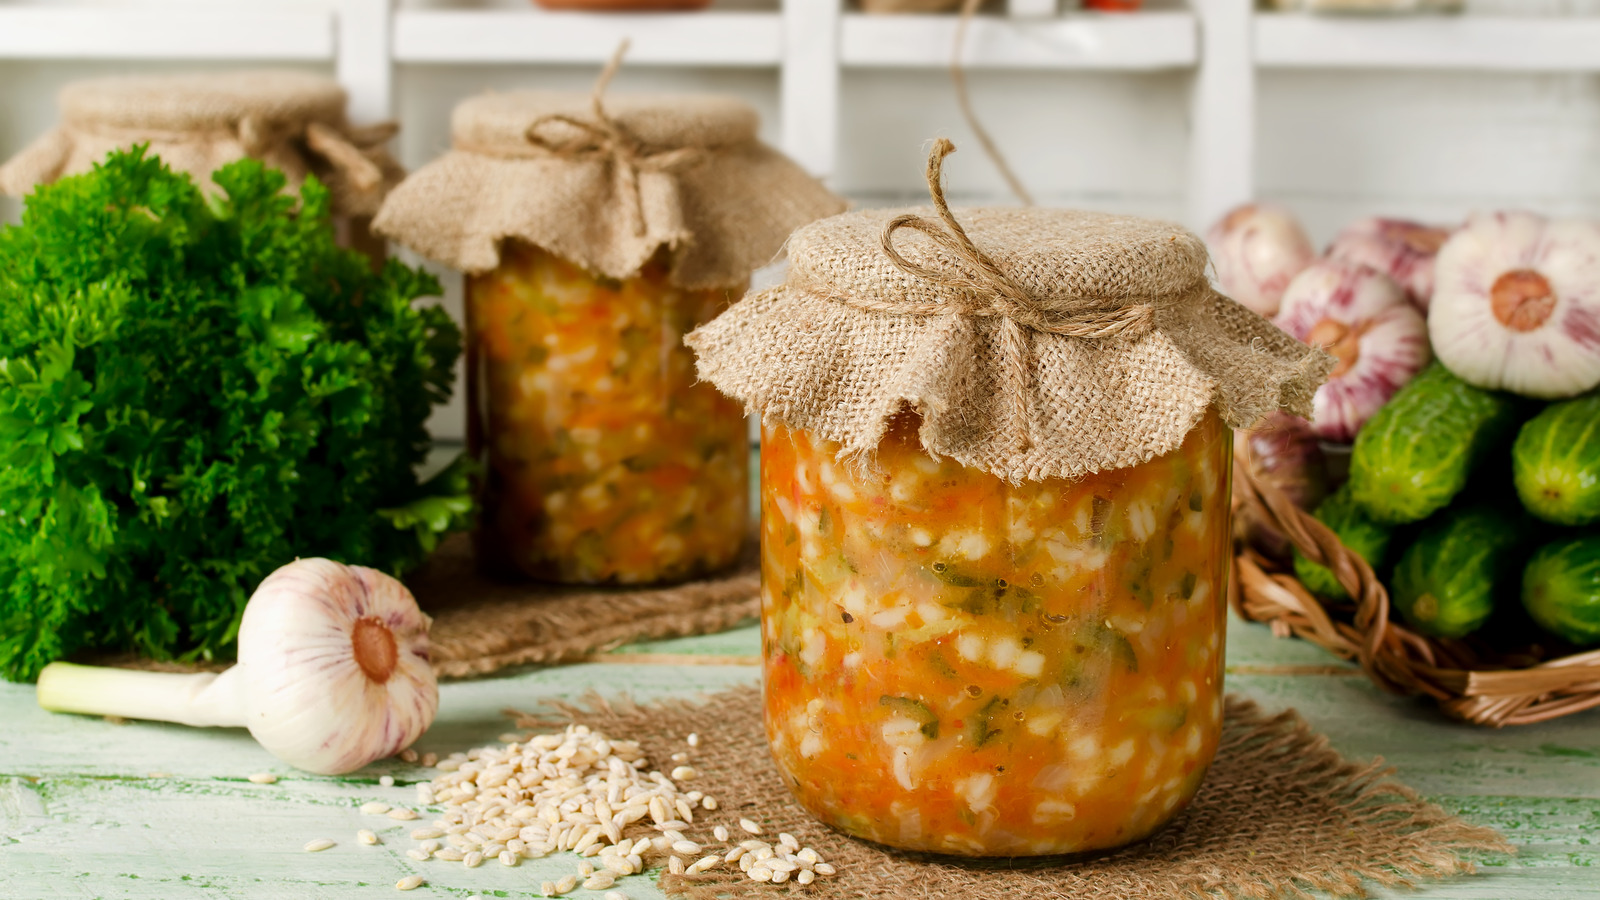 How to Freeze and Thaw Soup in Mason Jars - No More Cracks!